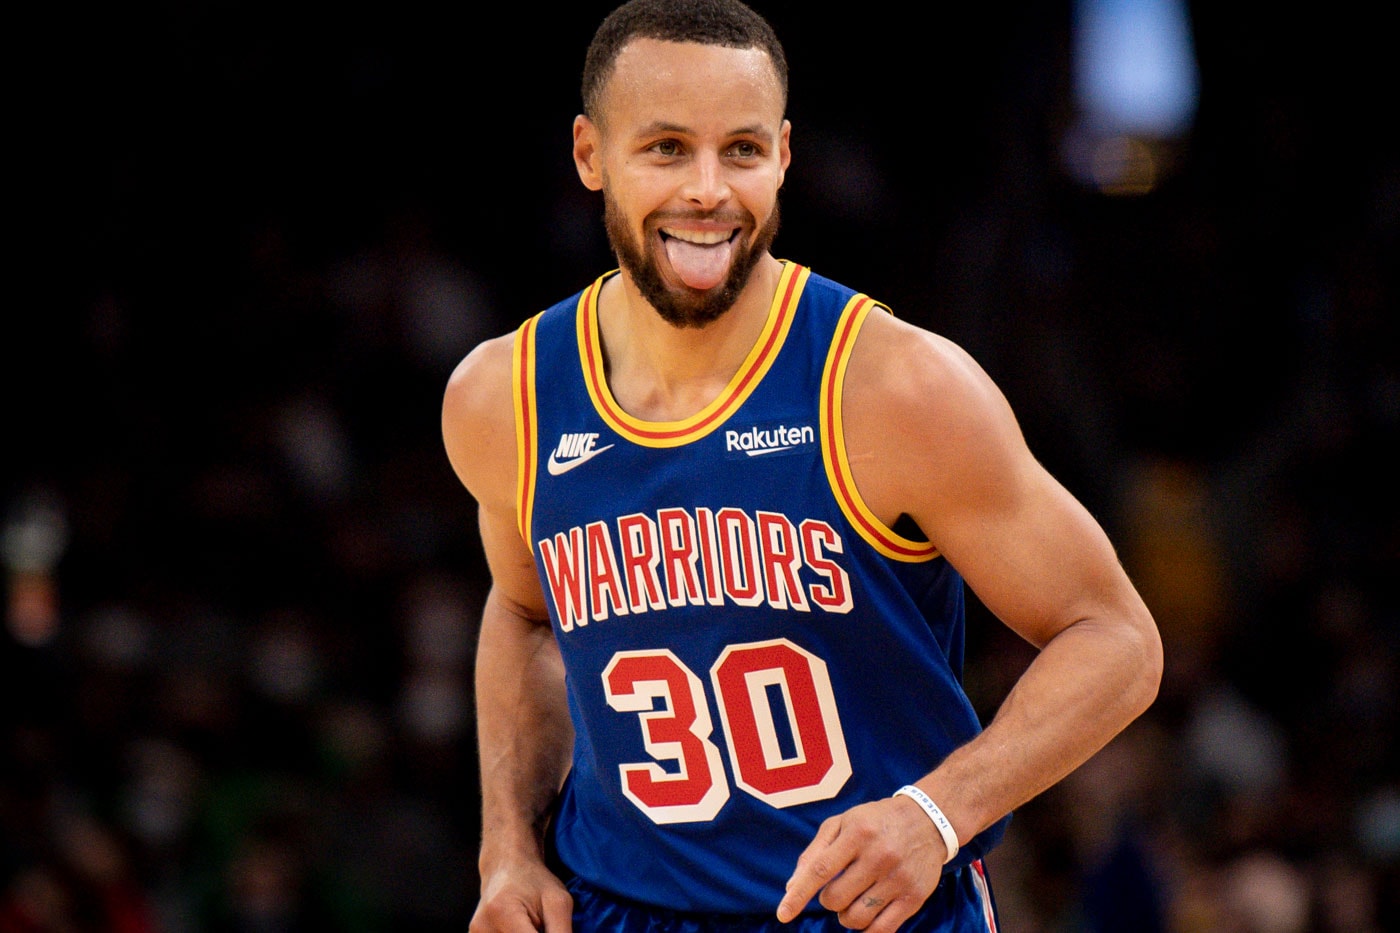 Steph Curry Is the First Player in NBA History To Make 3,000 Three-Pointers basketball stephen curry basketball golden state warriors klay thompson draymond green